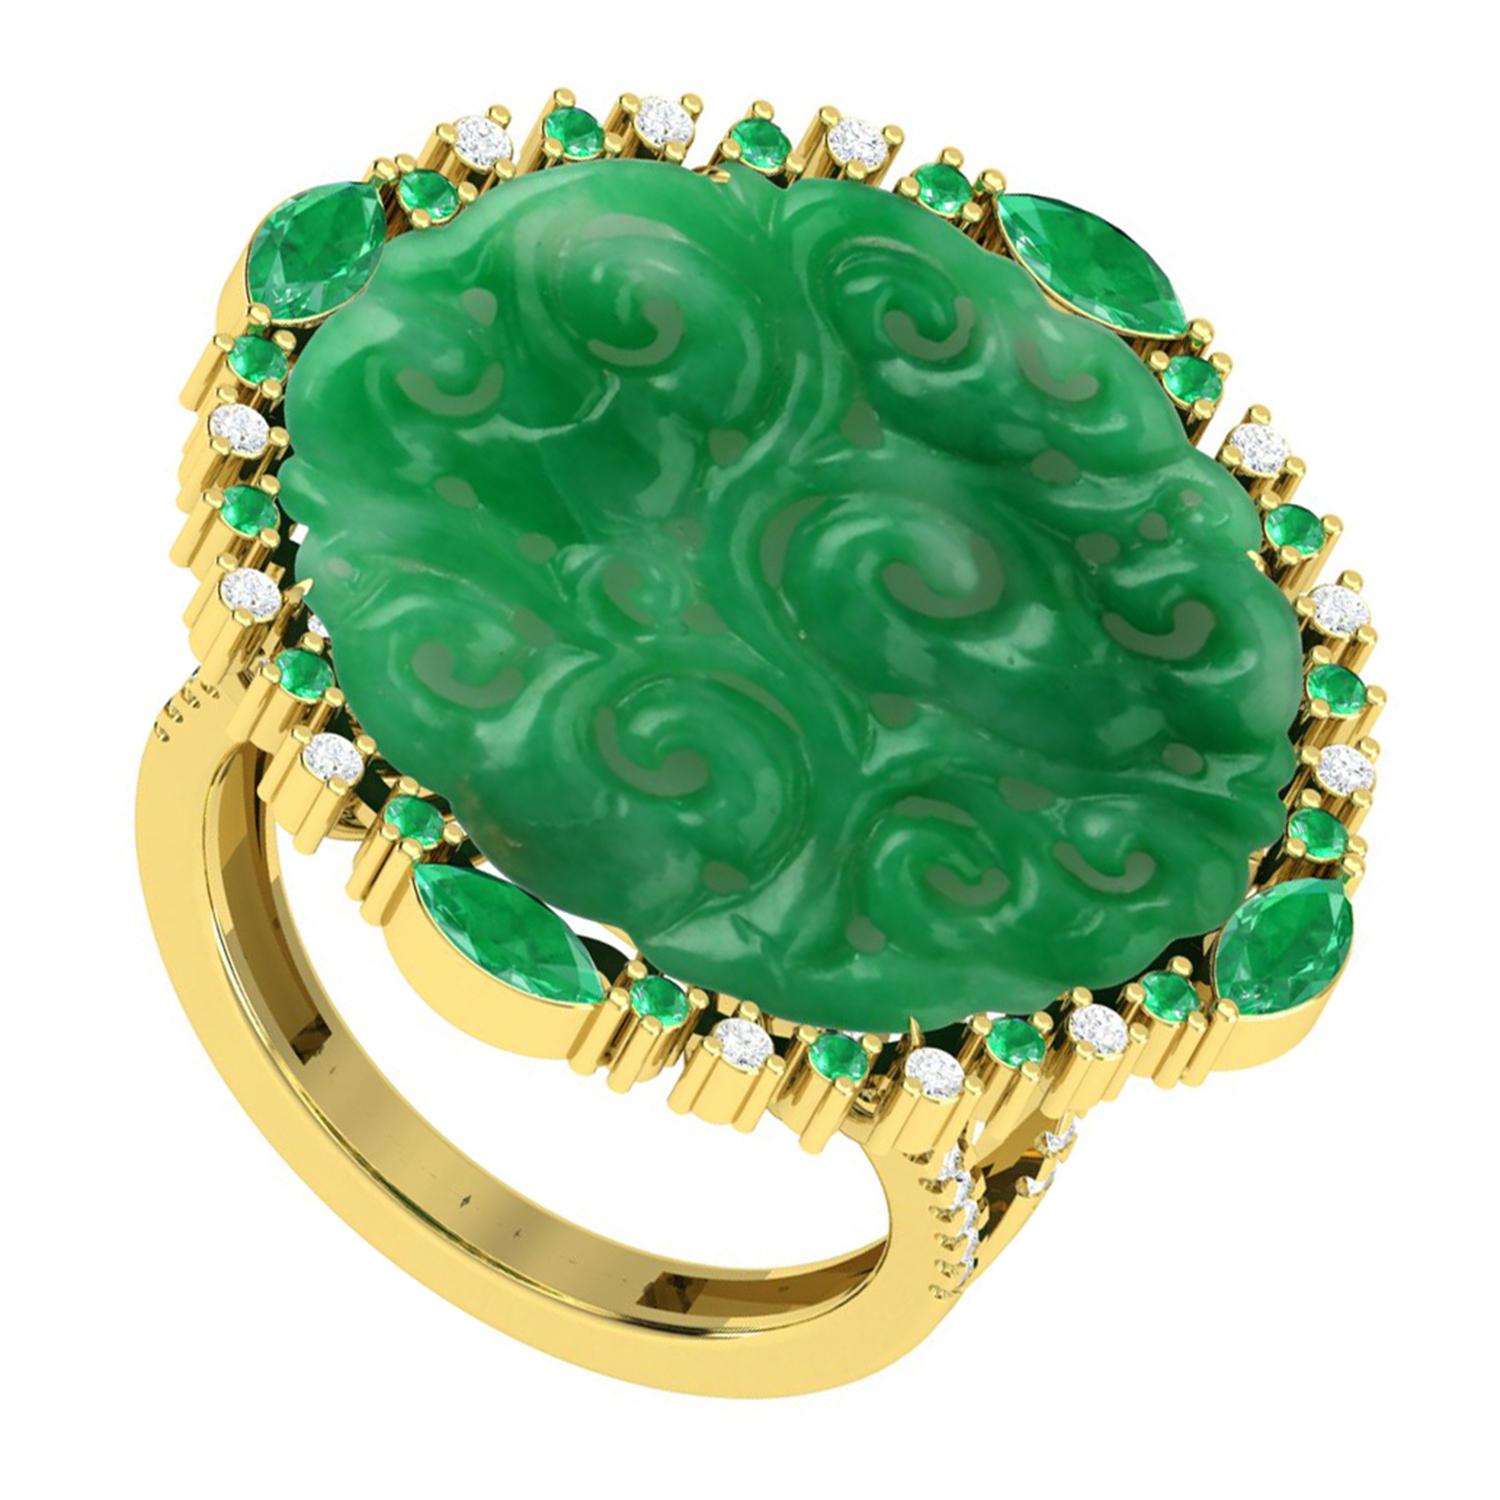 Brilliant Cut Hand Carved Jade Ring with Diamonds in 18 Karat Yellow Gold